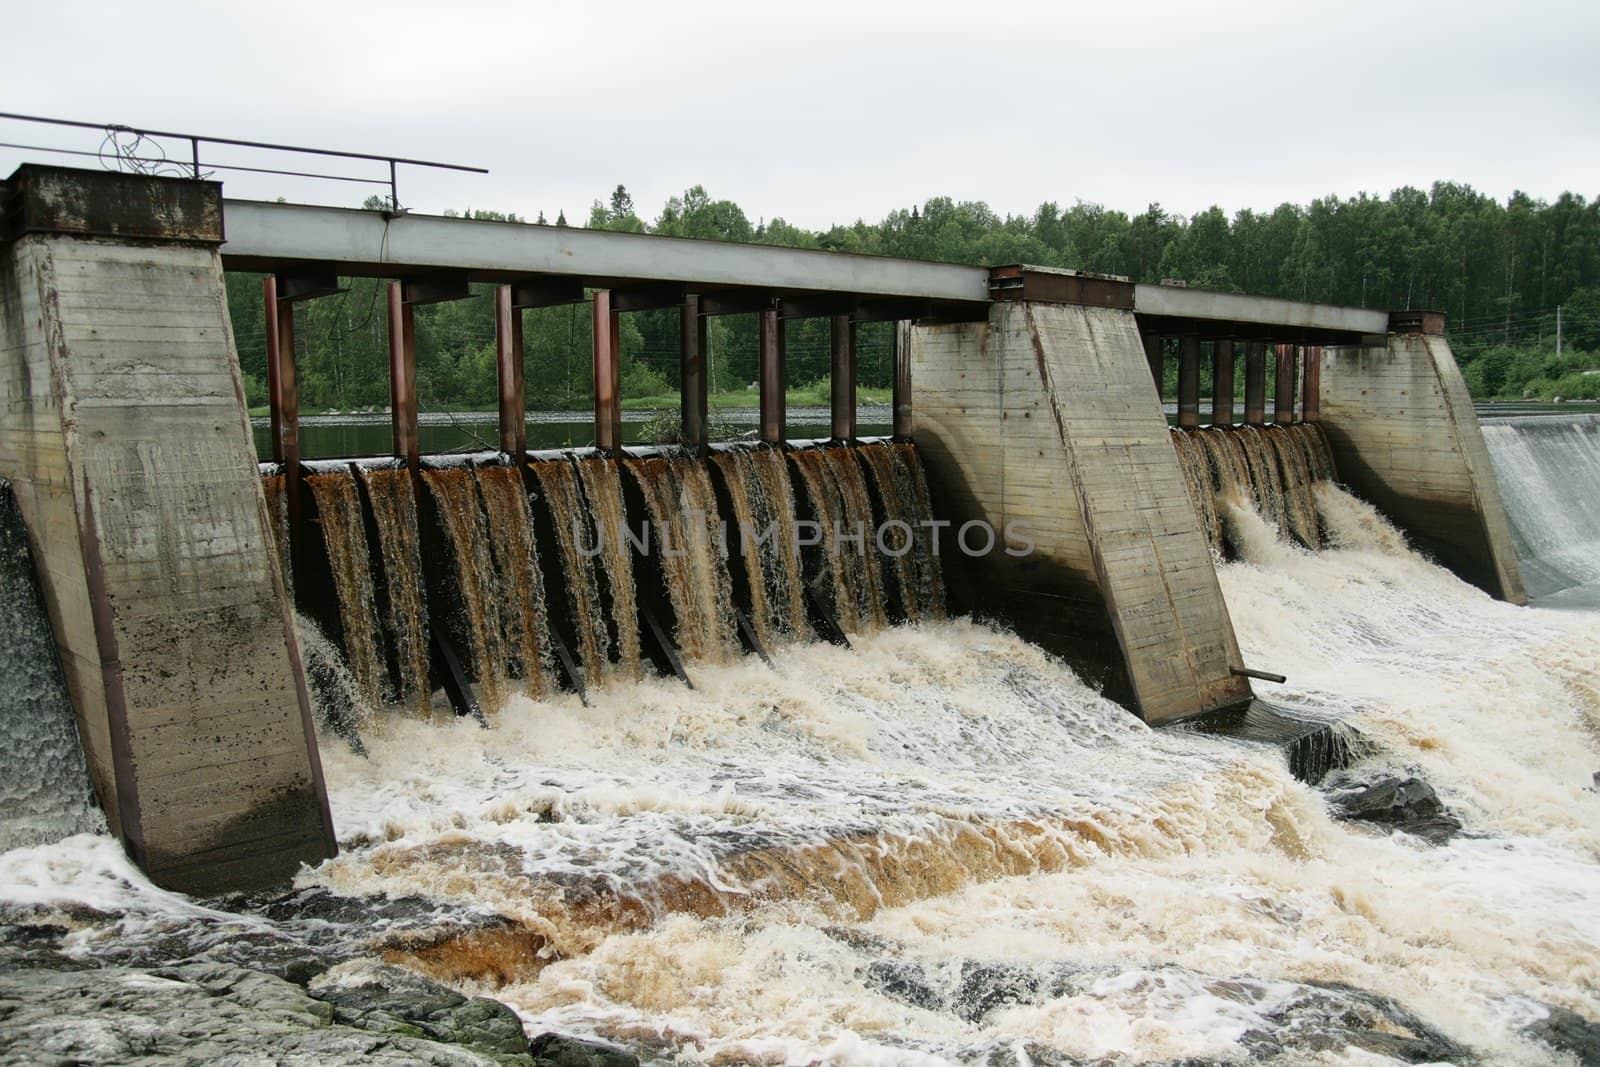 Dam of a hydroelectric power station on a karelian river, Russia